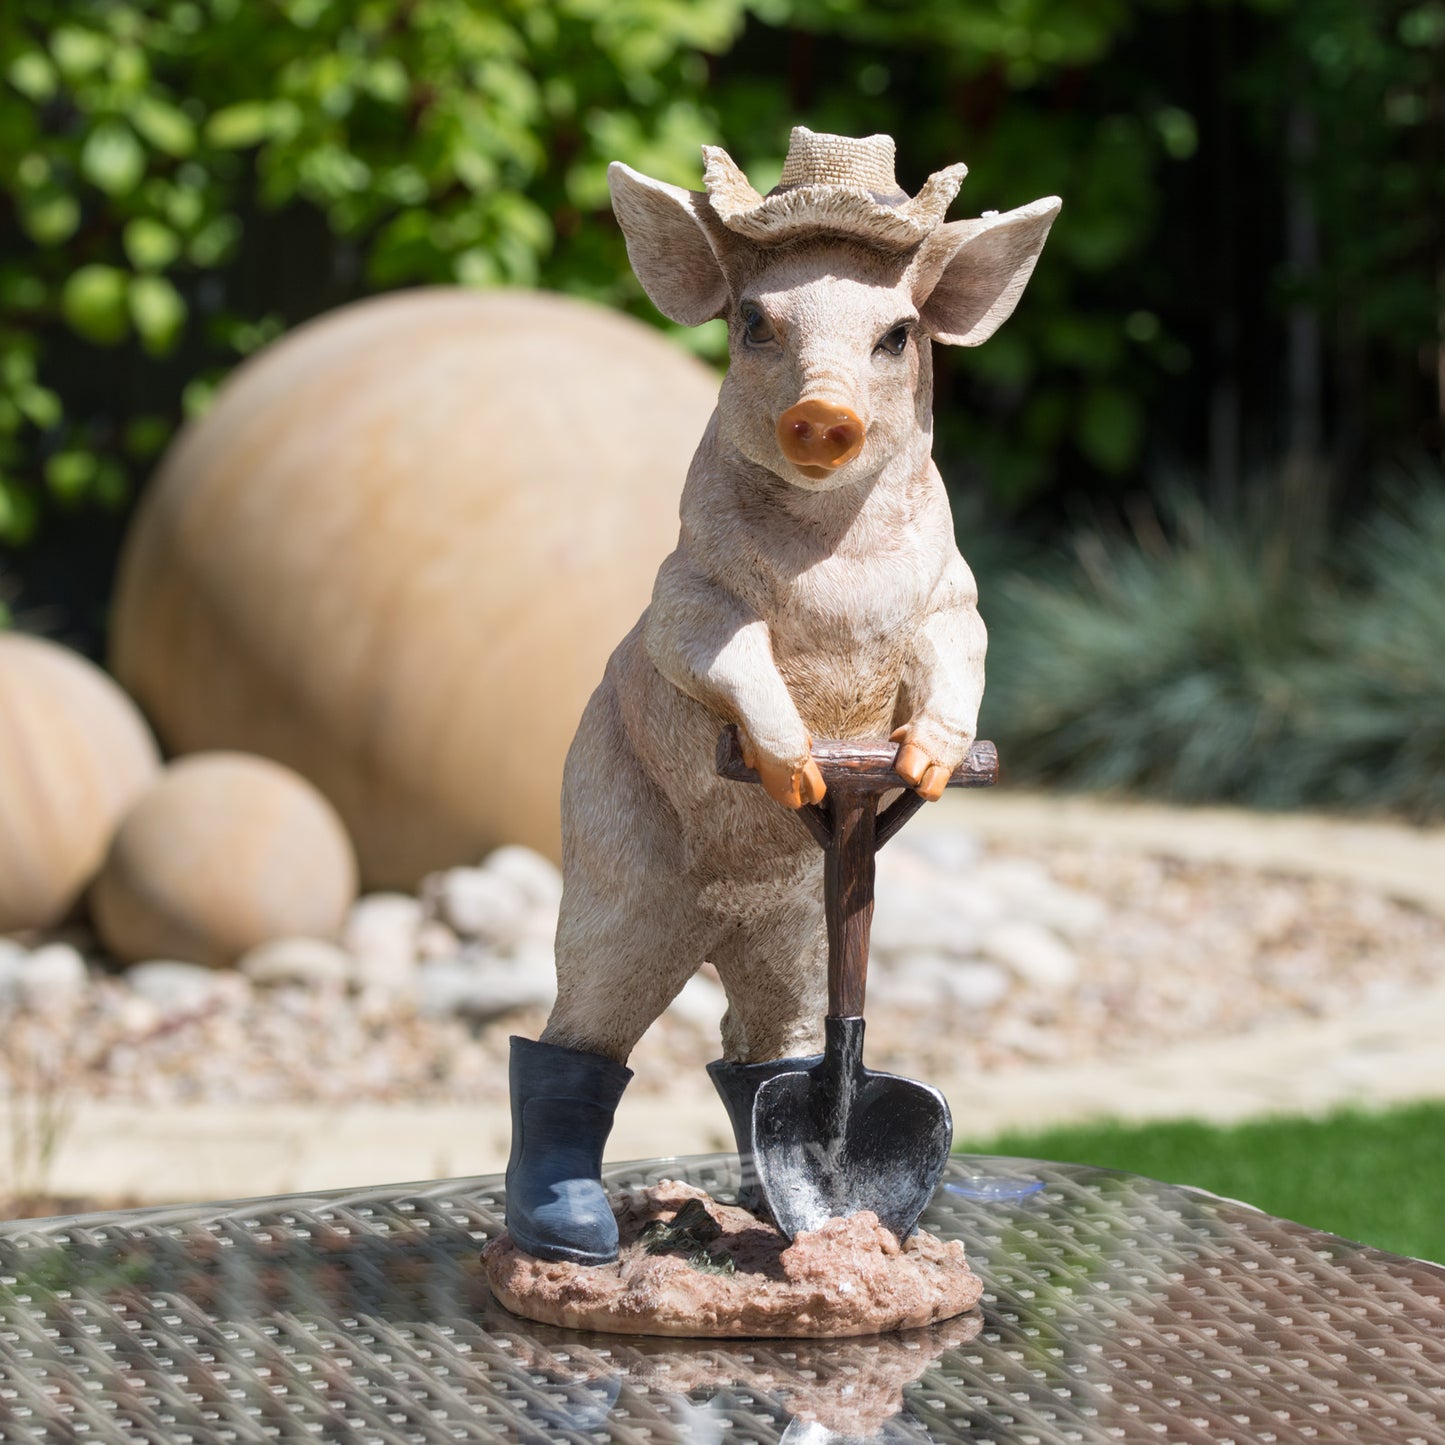 Pig In Boots with Shovel & Hat 39cm Resin Garden Ornament